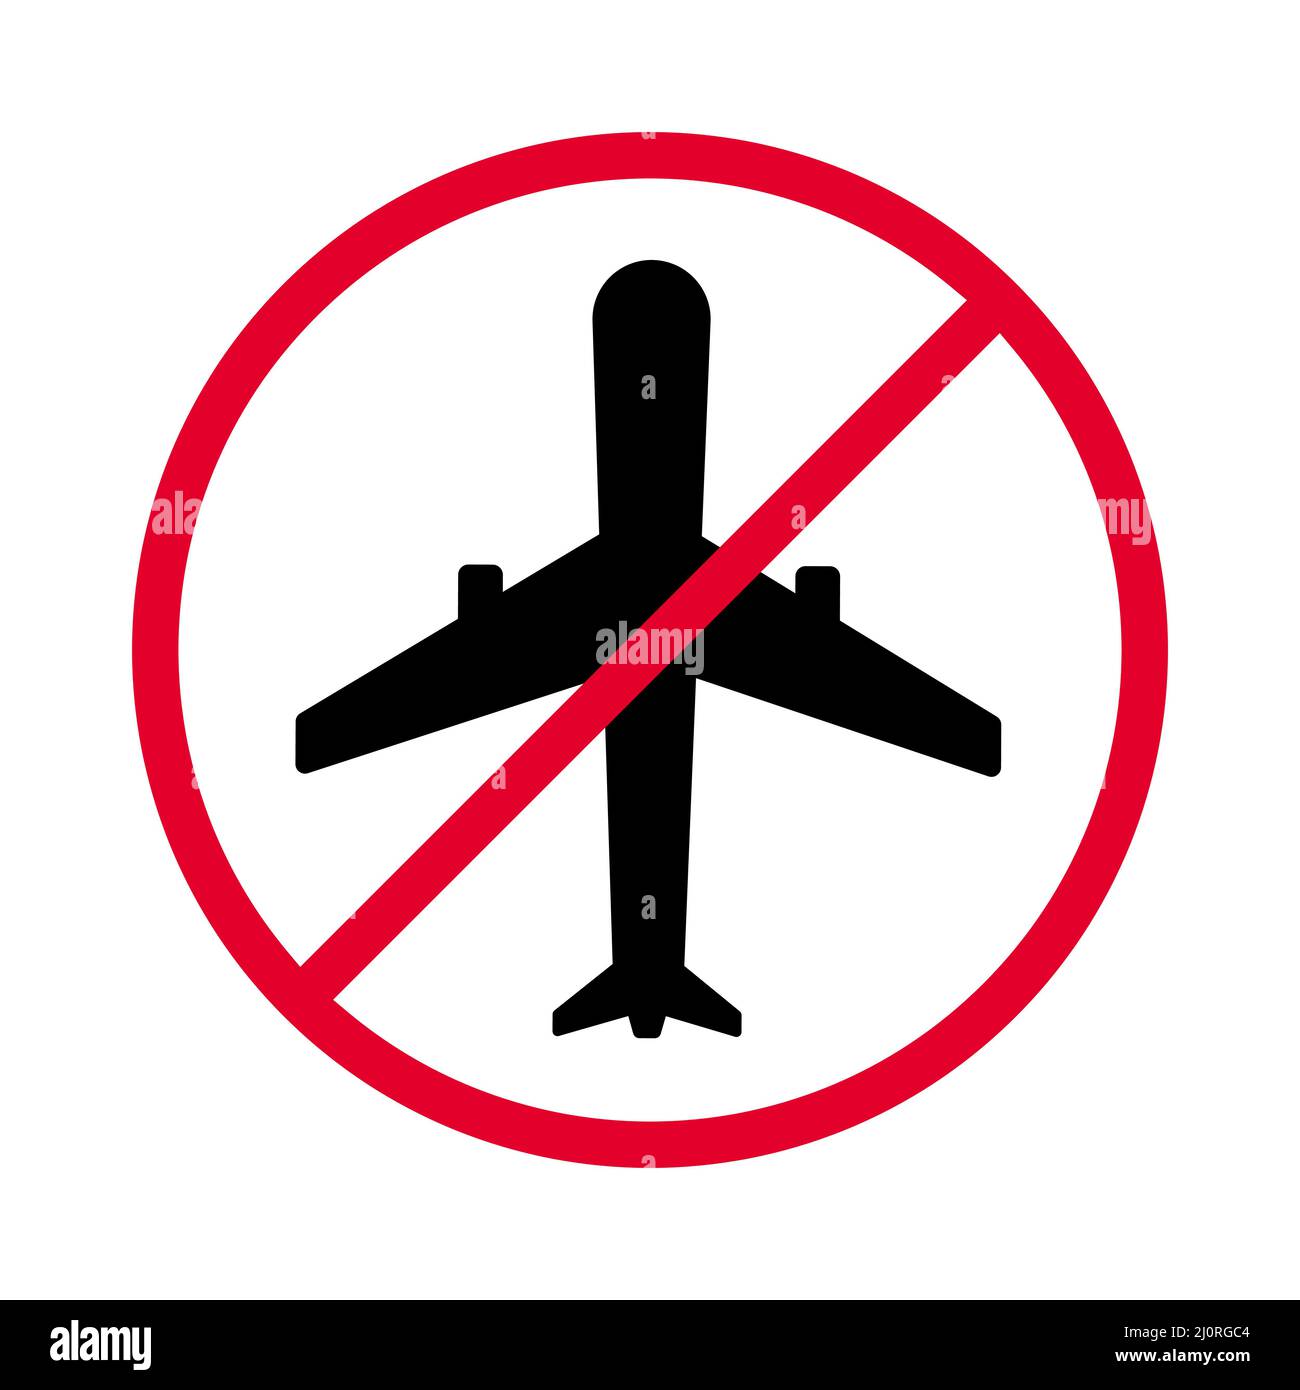 Do not fly icon. Prohibited stop airplane symbol. Closed sky sign. Stock Vector